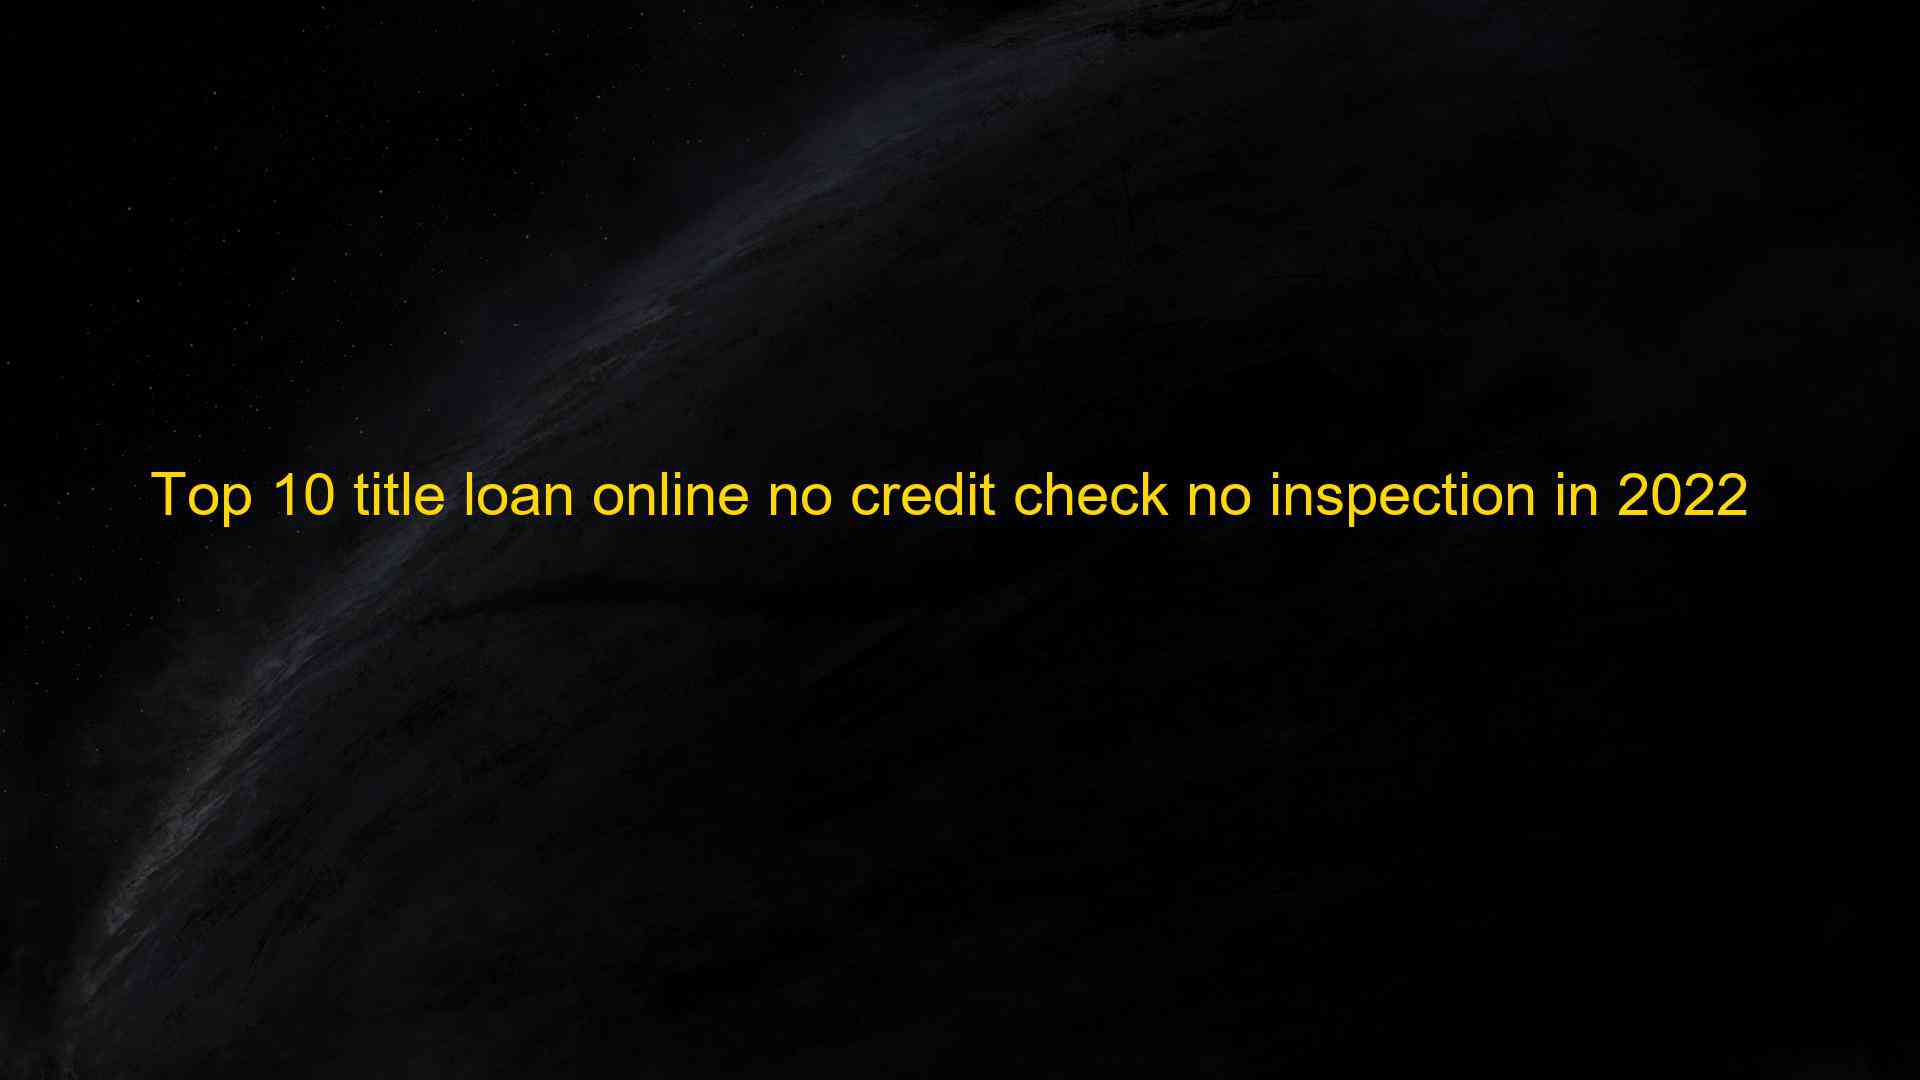 Top 10 title loan online no credit check no inspection in 2022 1660190969